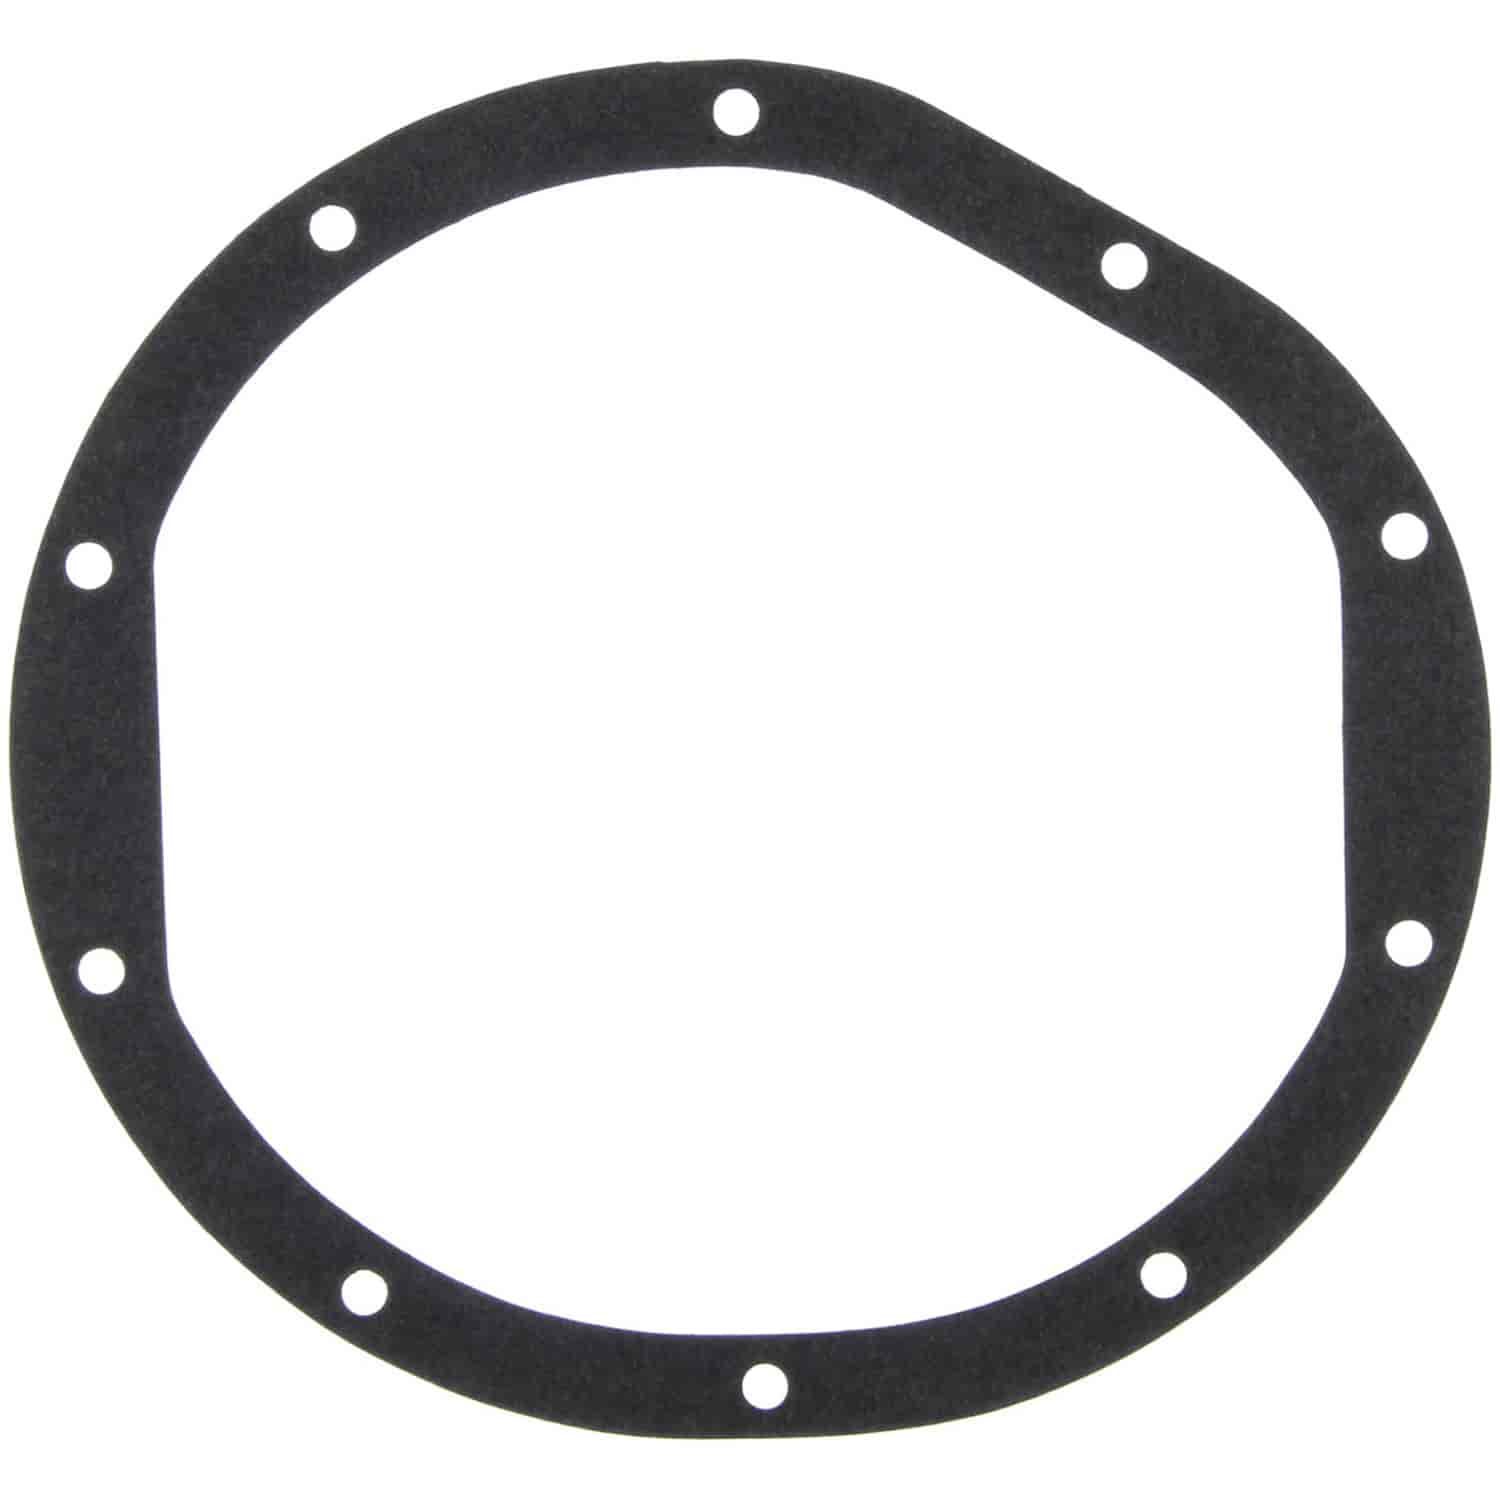 Axle Housing Cover Gasket 1977-1990 GM Truck 10-Bolt Front Axle